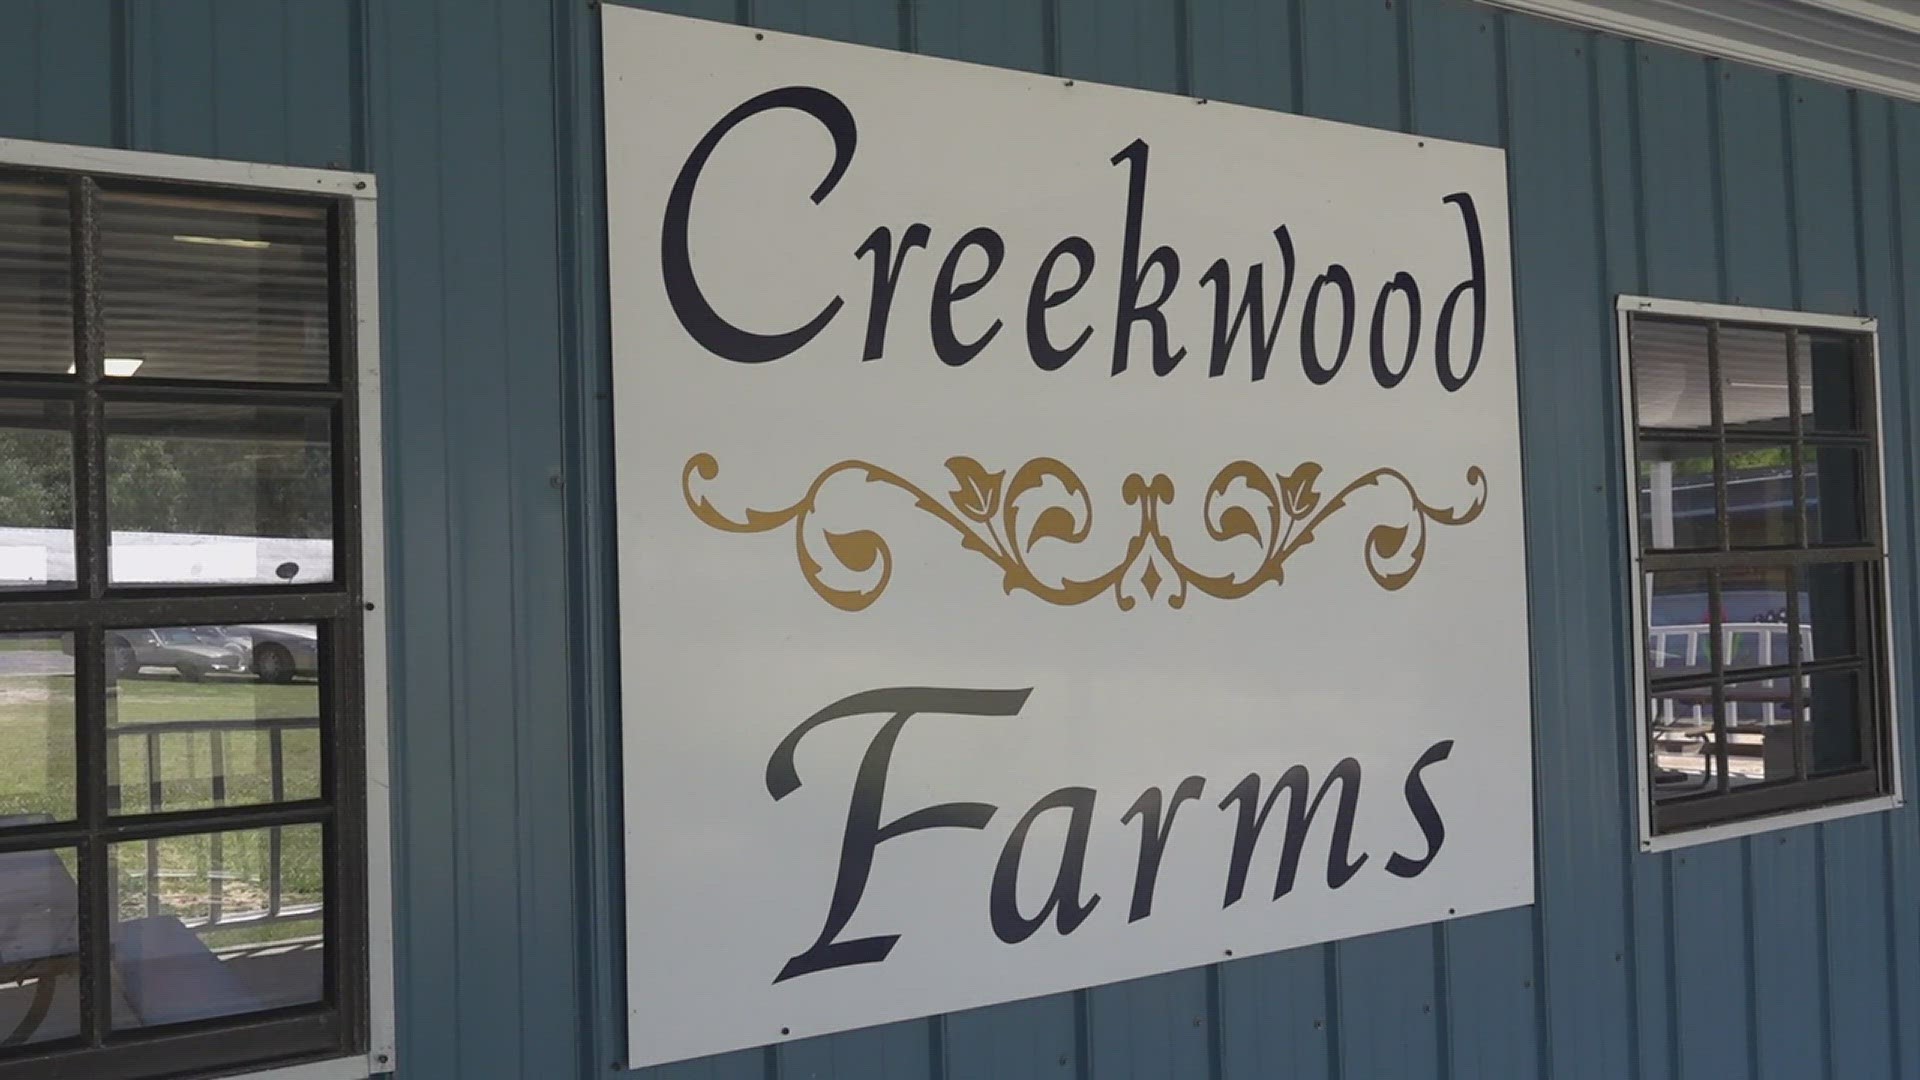 Creekwood Farms is a distributor for H-E-B to provide fresh produce statewide.